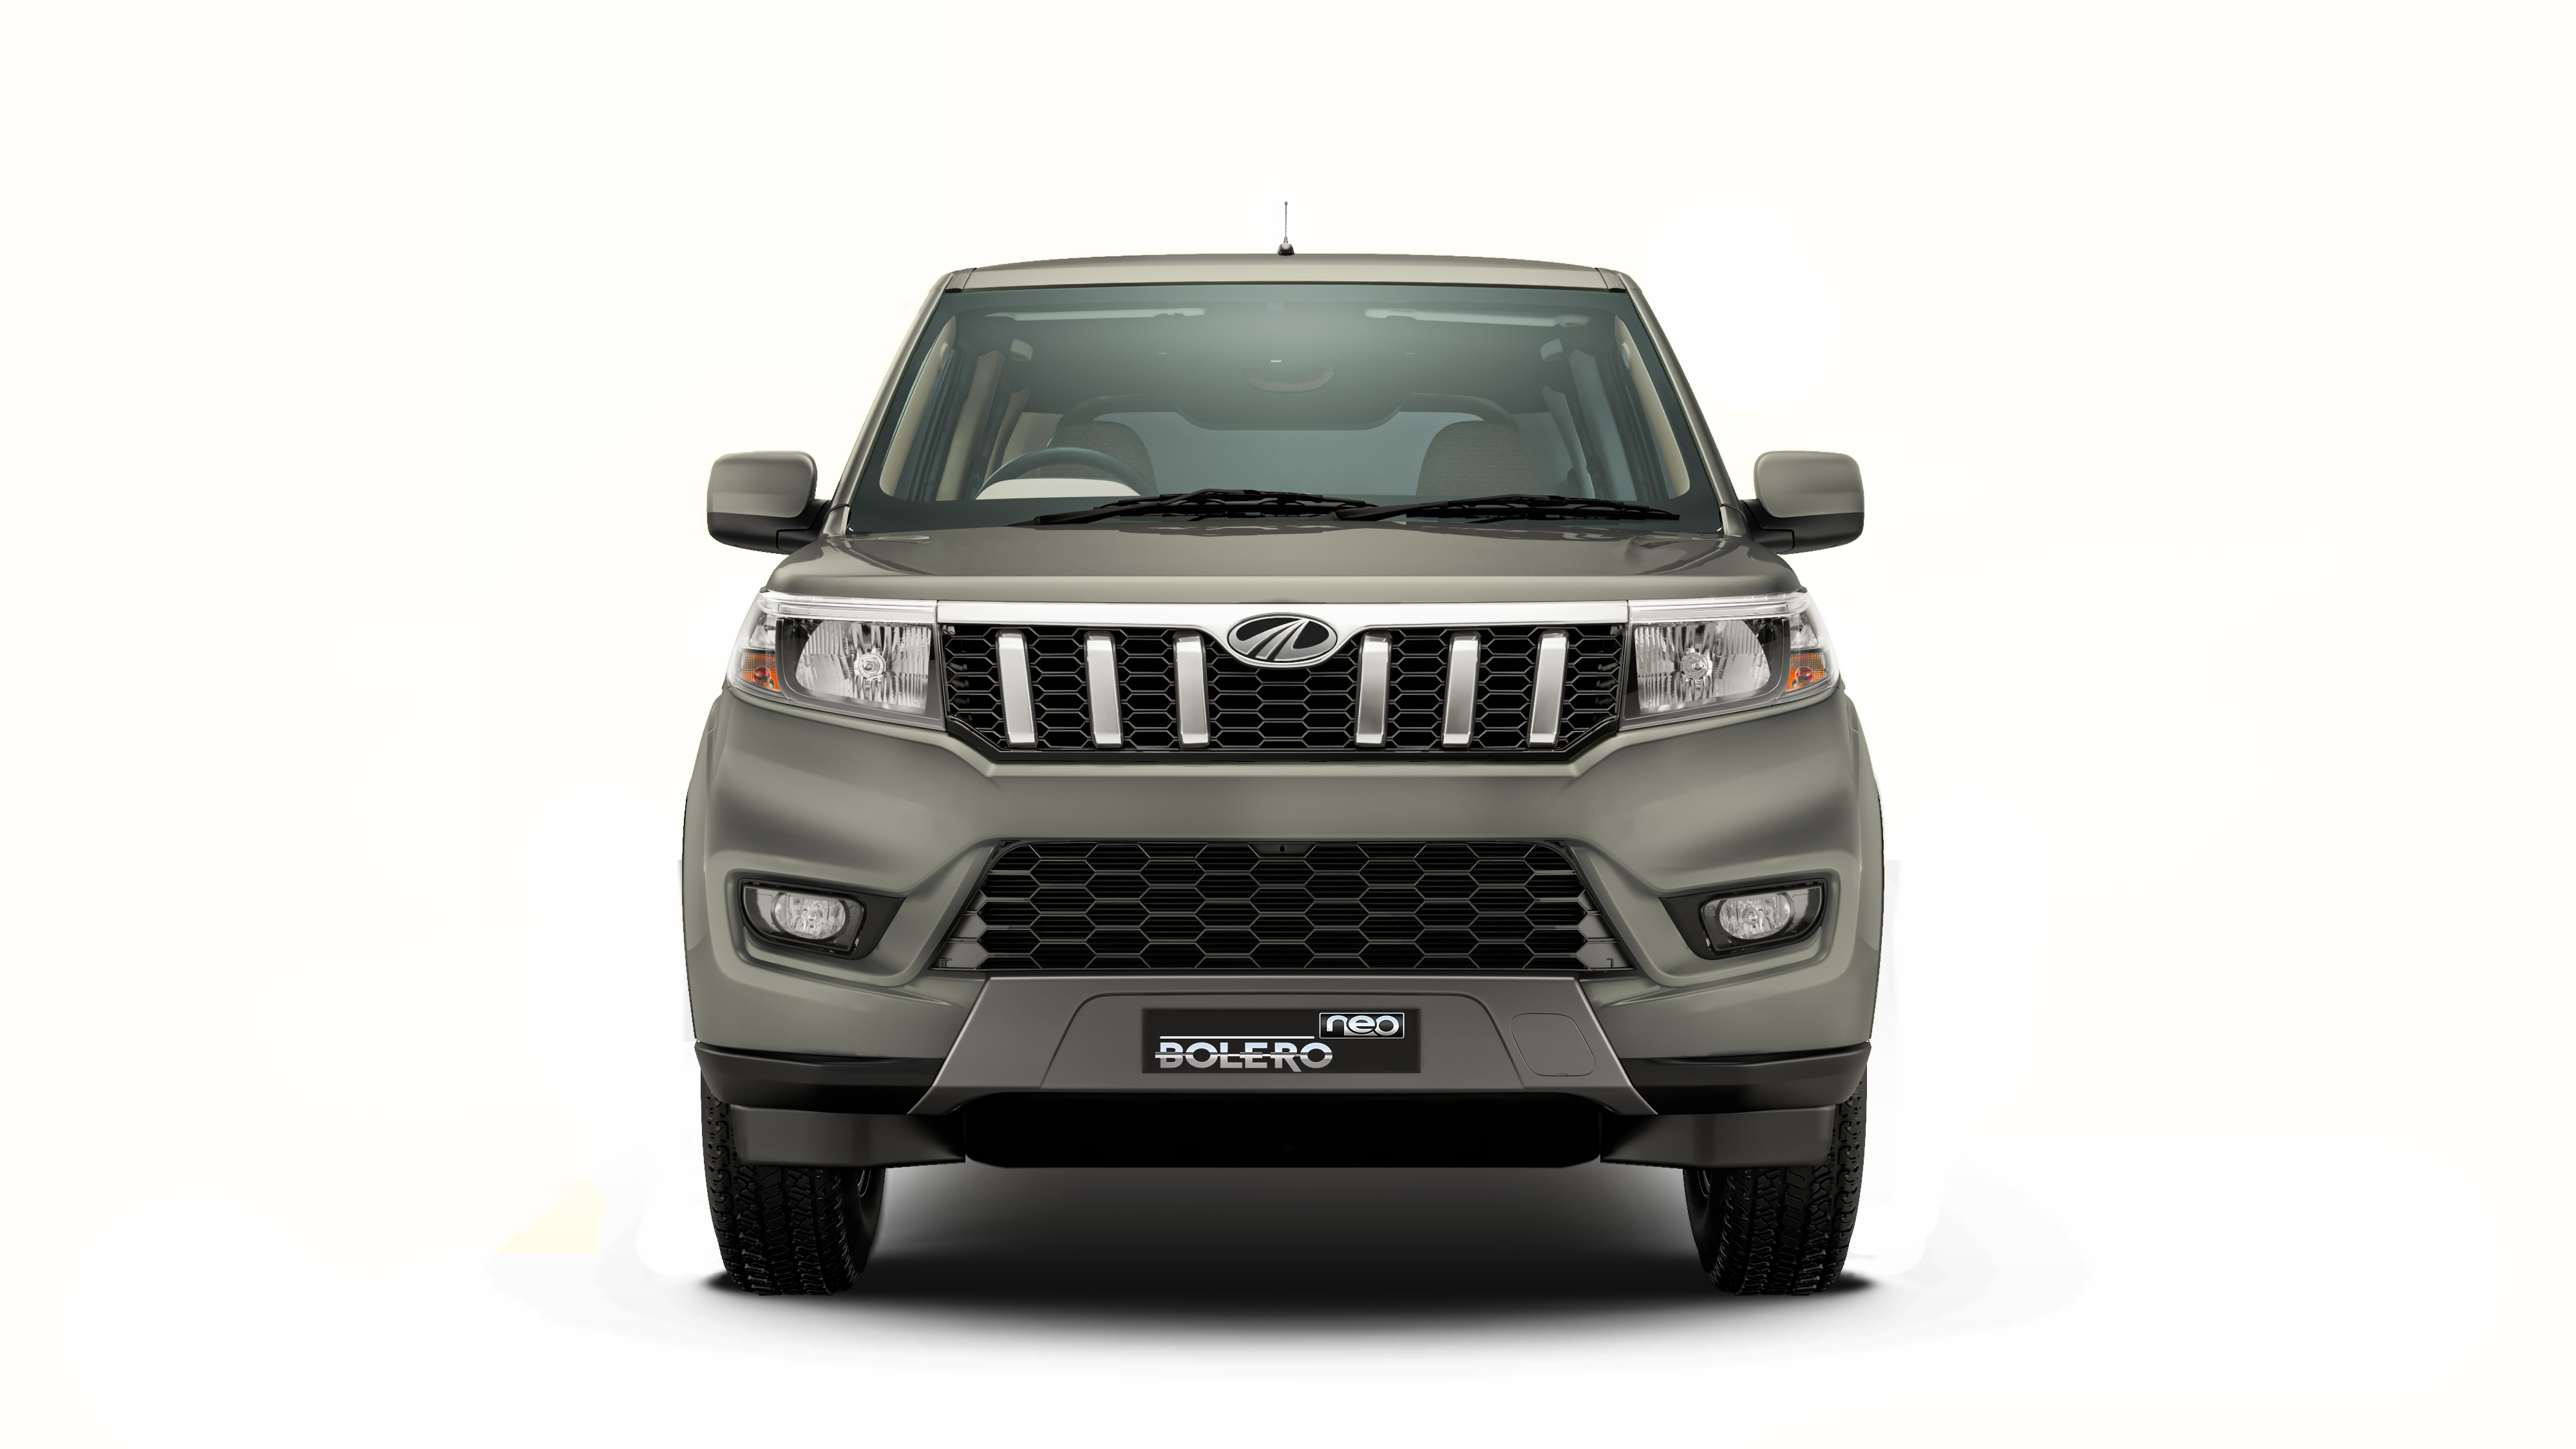 Mahindra launches the new ‘Bolero Neo’ at a starting price of ₹ 8.48 Lakh